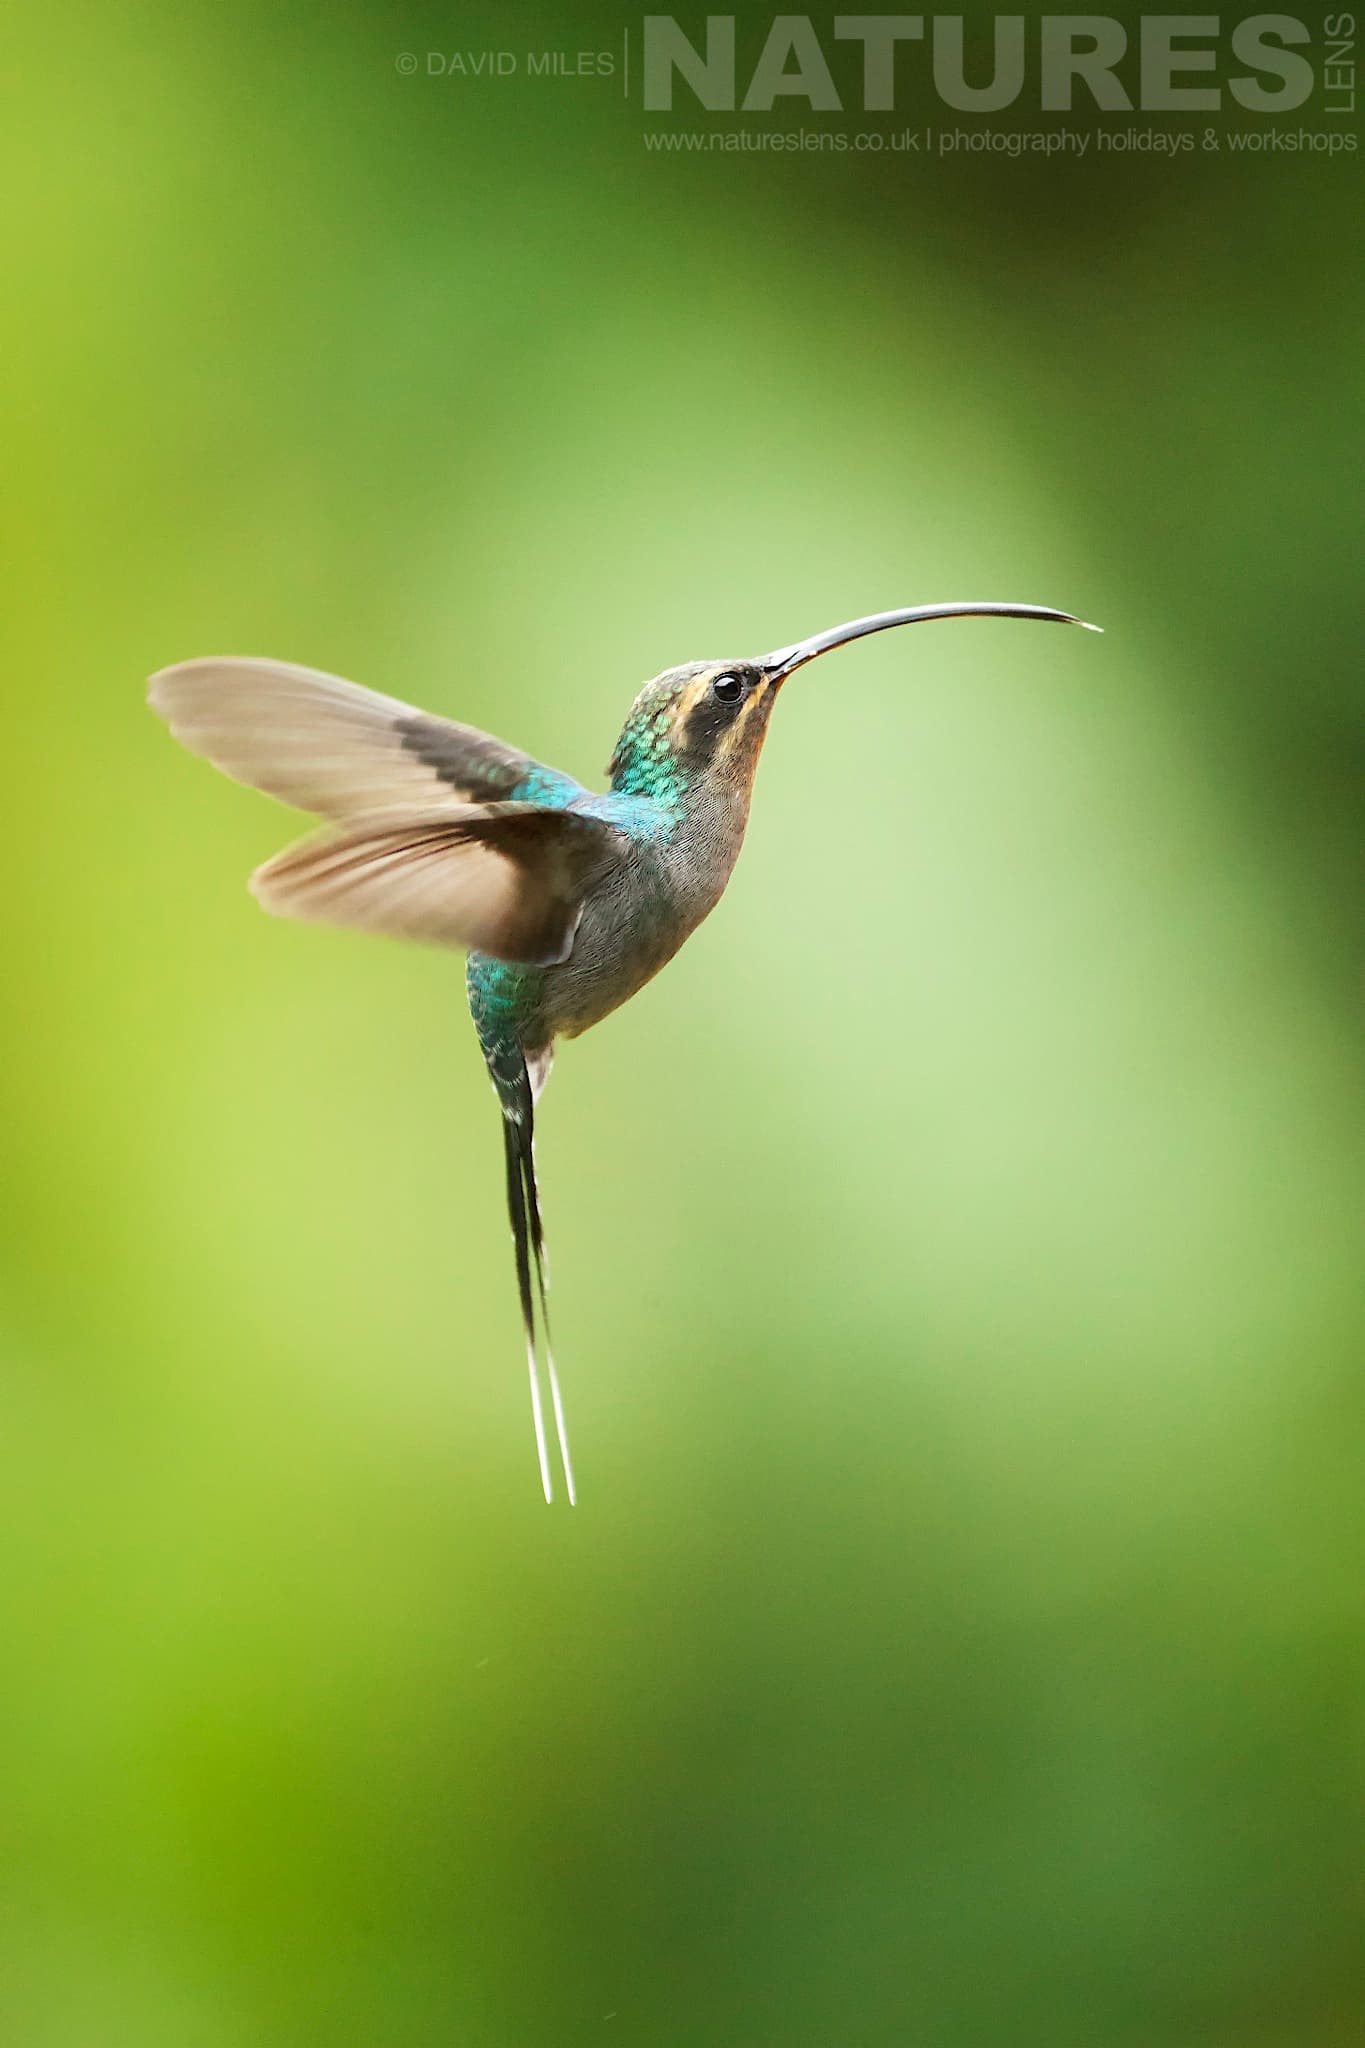 A Portrait Of A Green Hermit Hummingbird Typical Of The Kind Of Image We Hope You Will Capture During Our Costa Rican Wildlife Photography Holiday